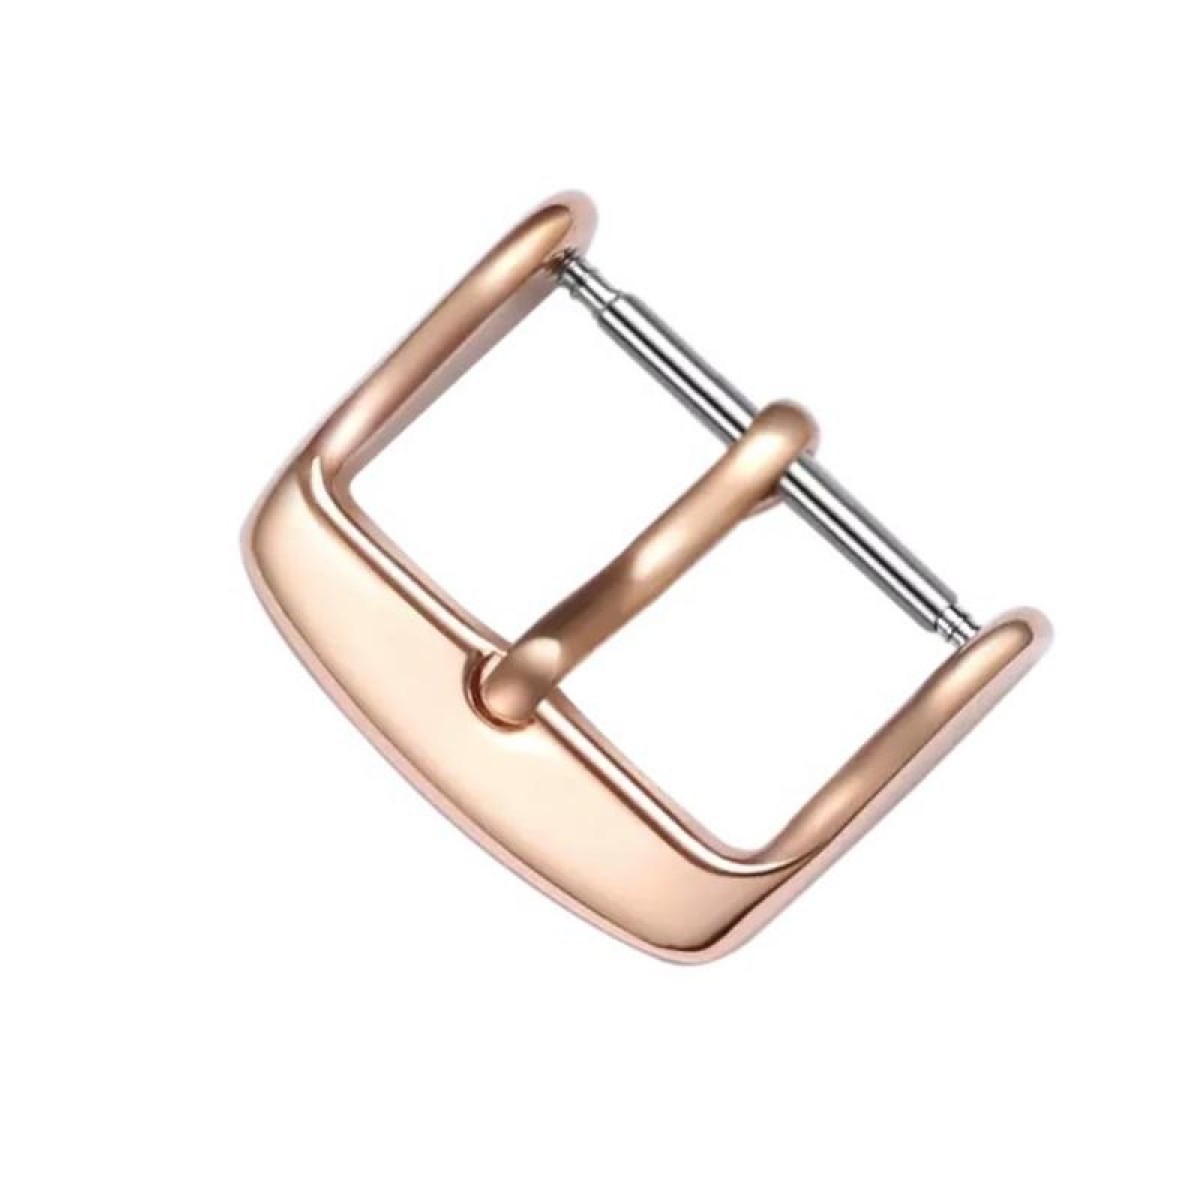 5pcs IP Plated Stainless Steel Pin Buckle Watch Accessories, Color: Rose Gold 14mm